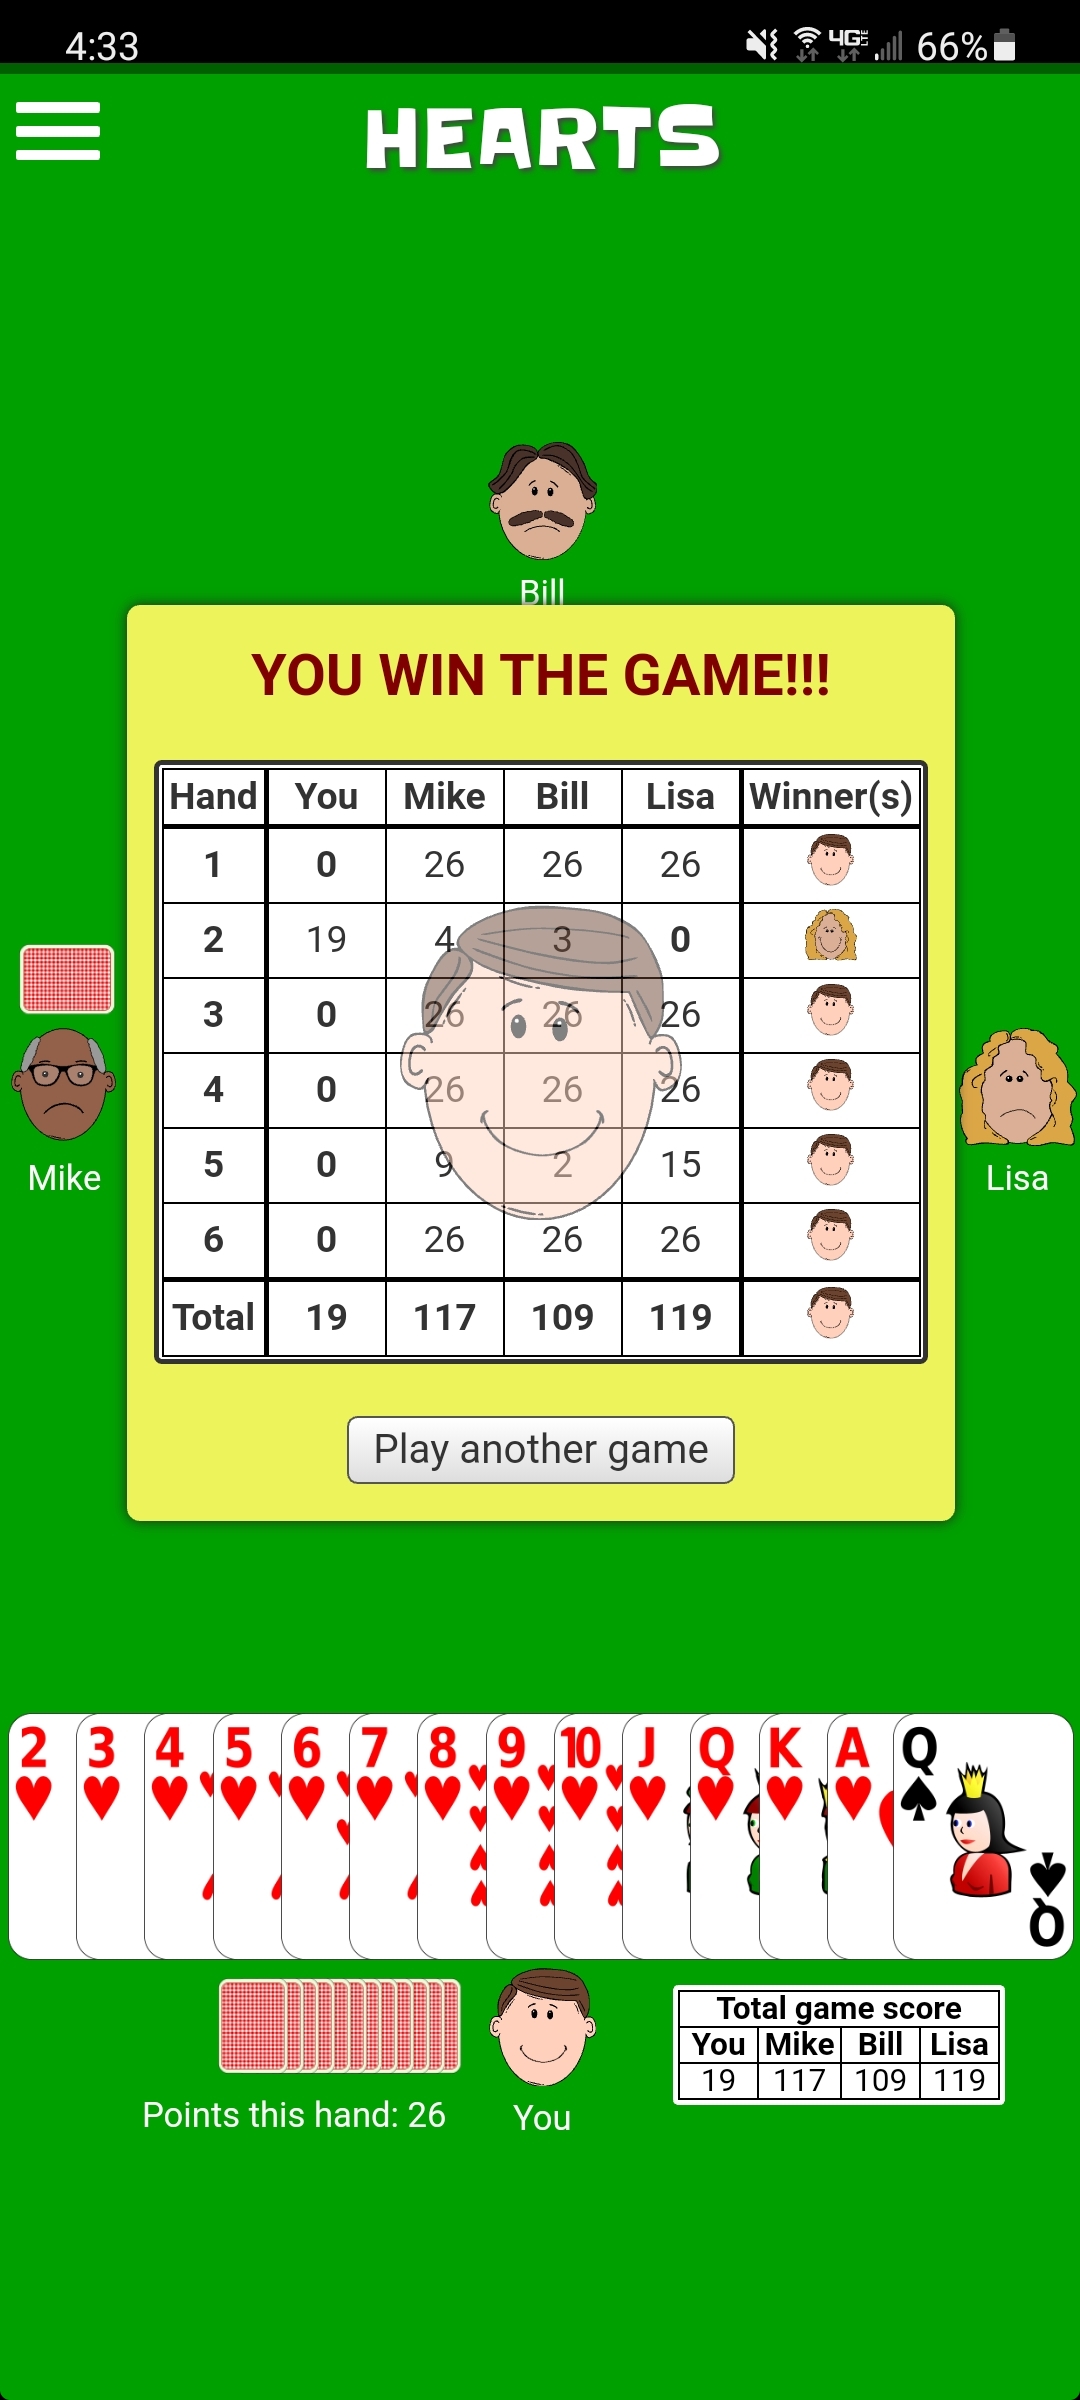 Cardgames io — Play for free at